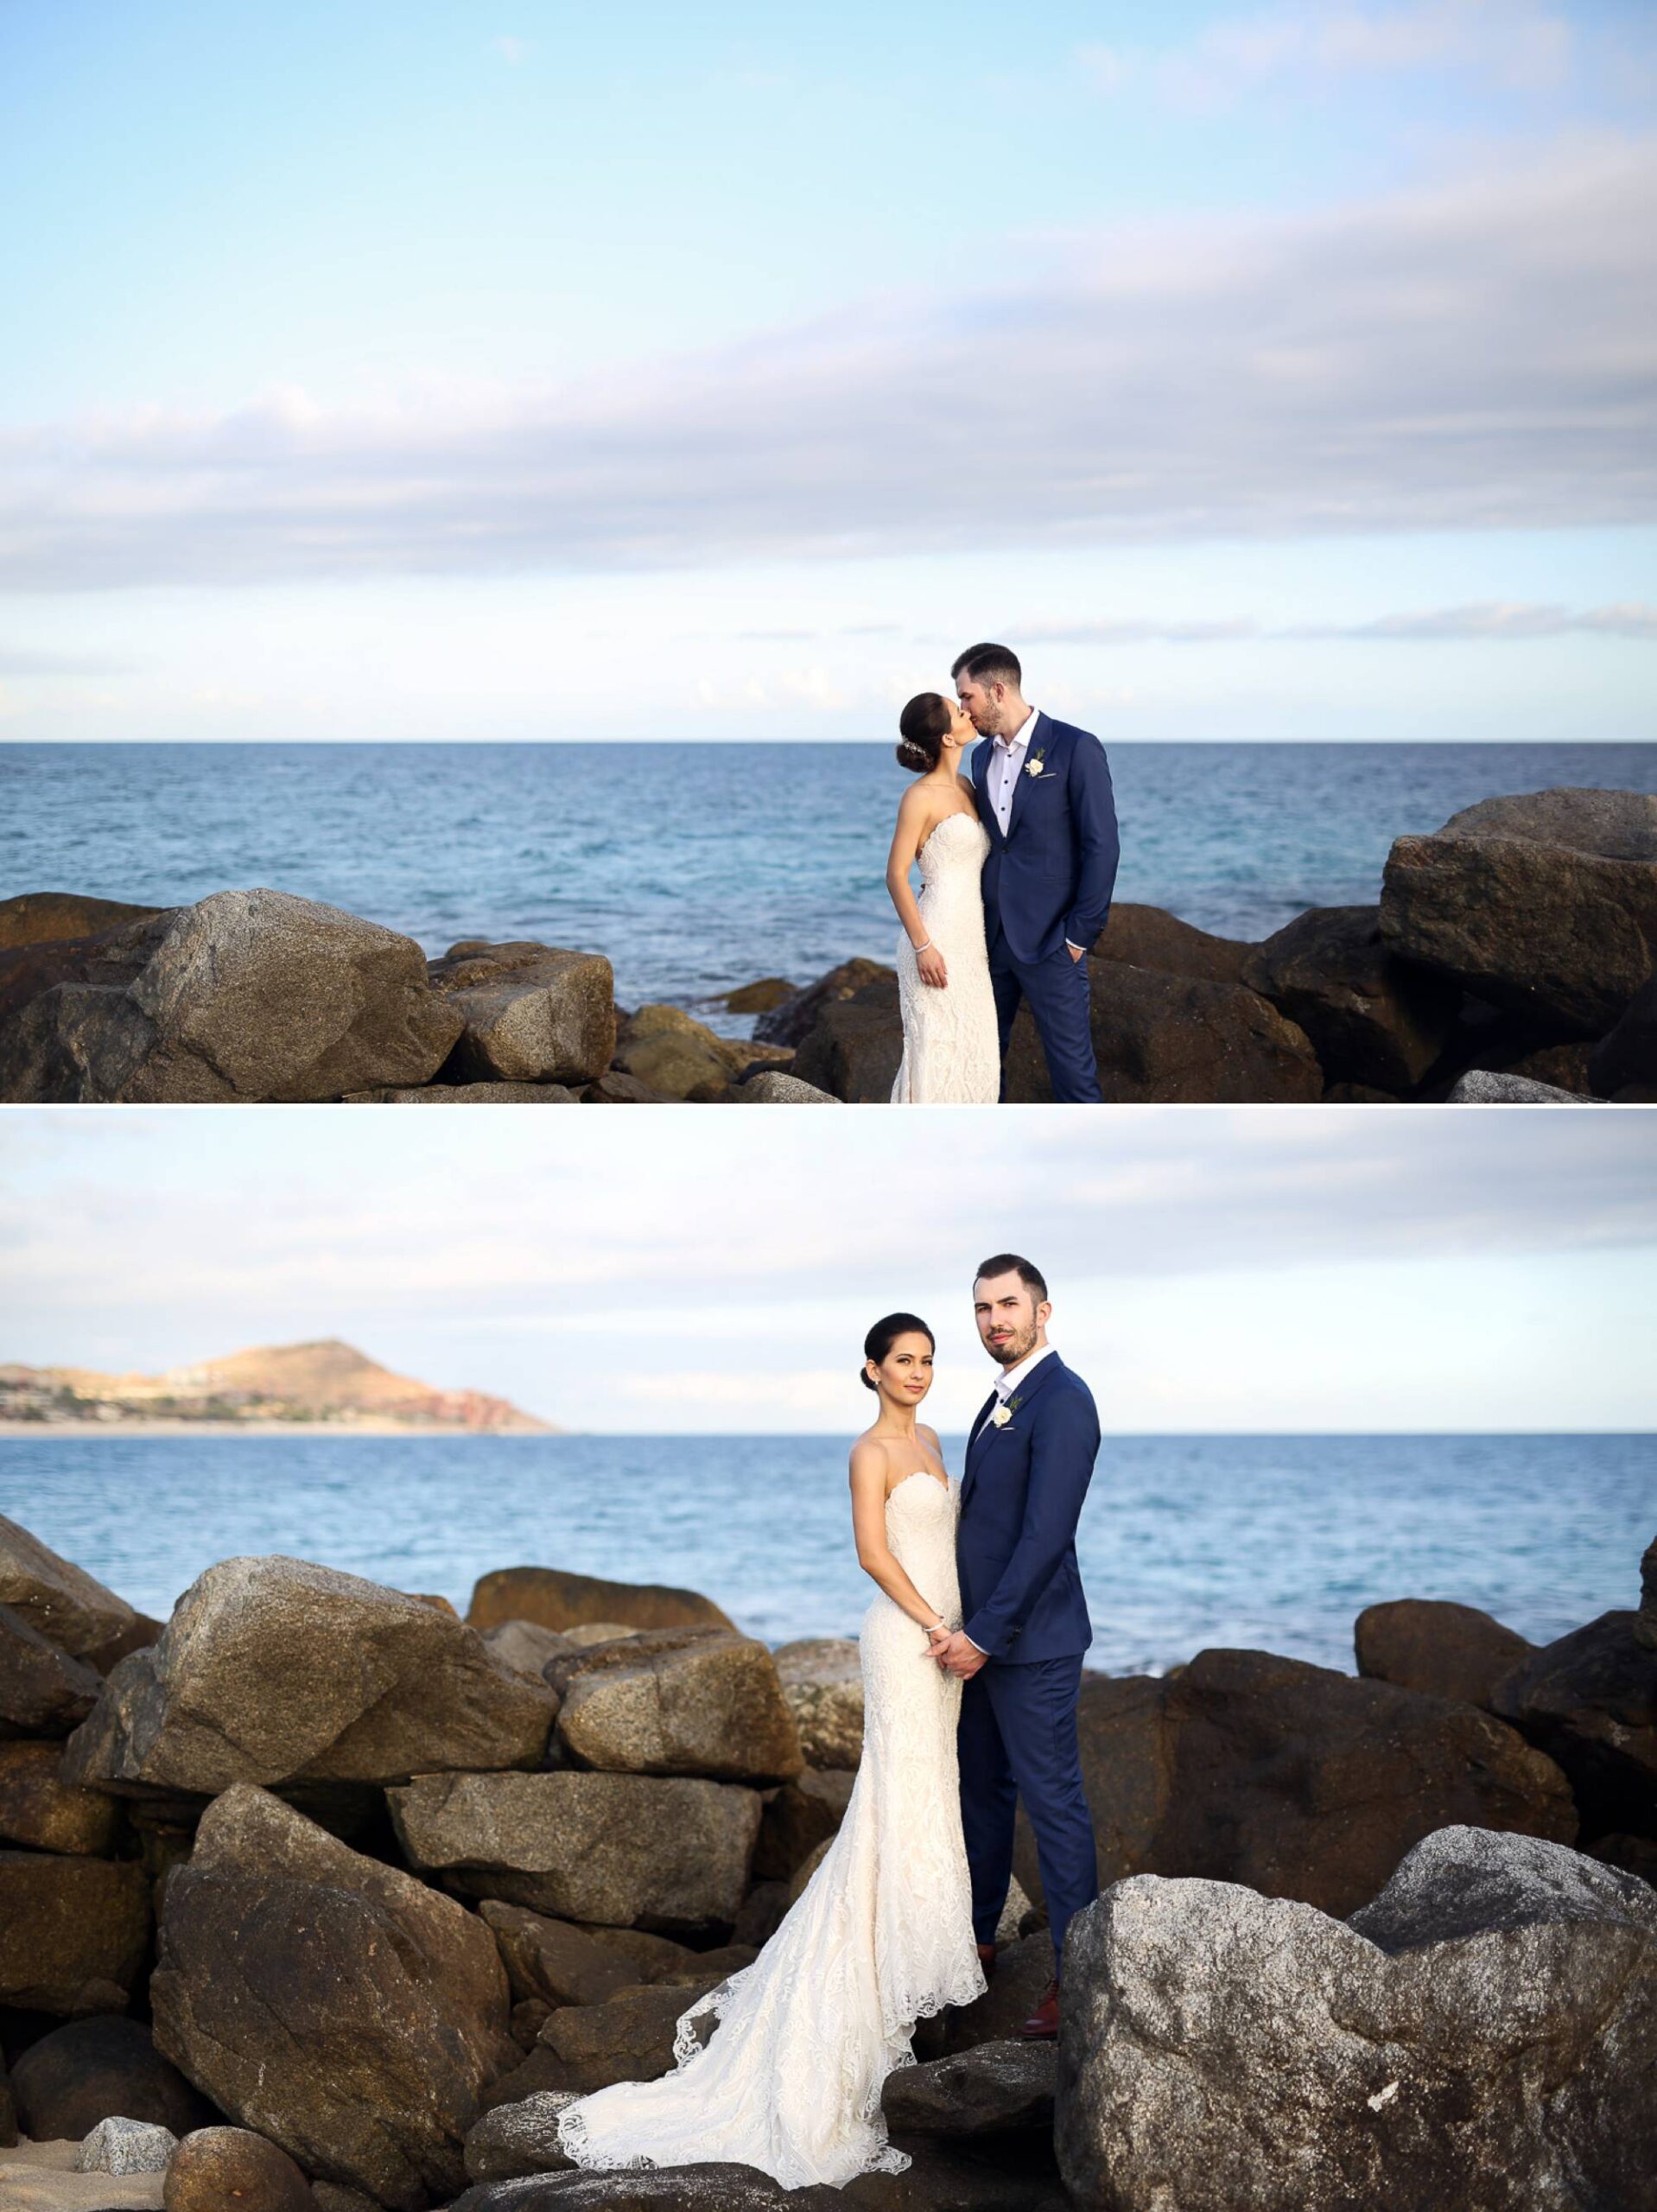 Wedding couple pose and kiss on rocks in front of ocean